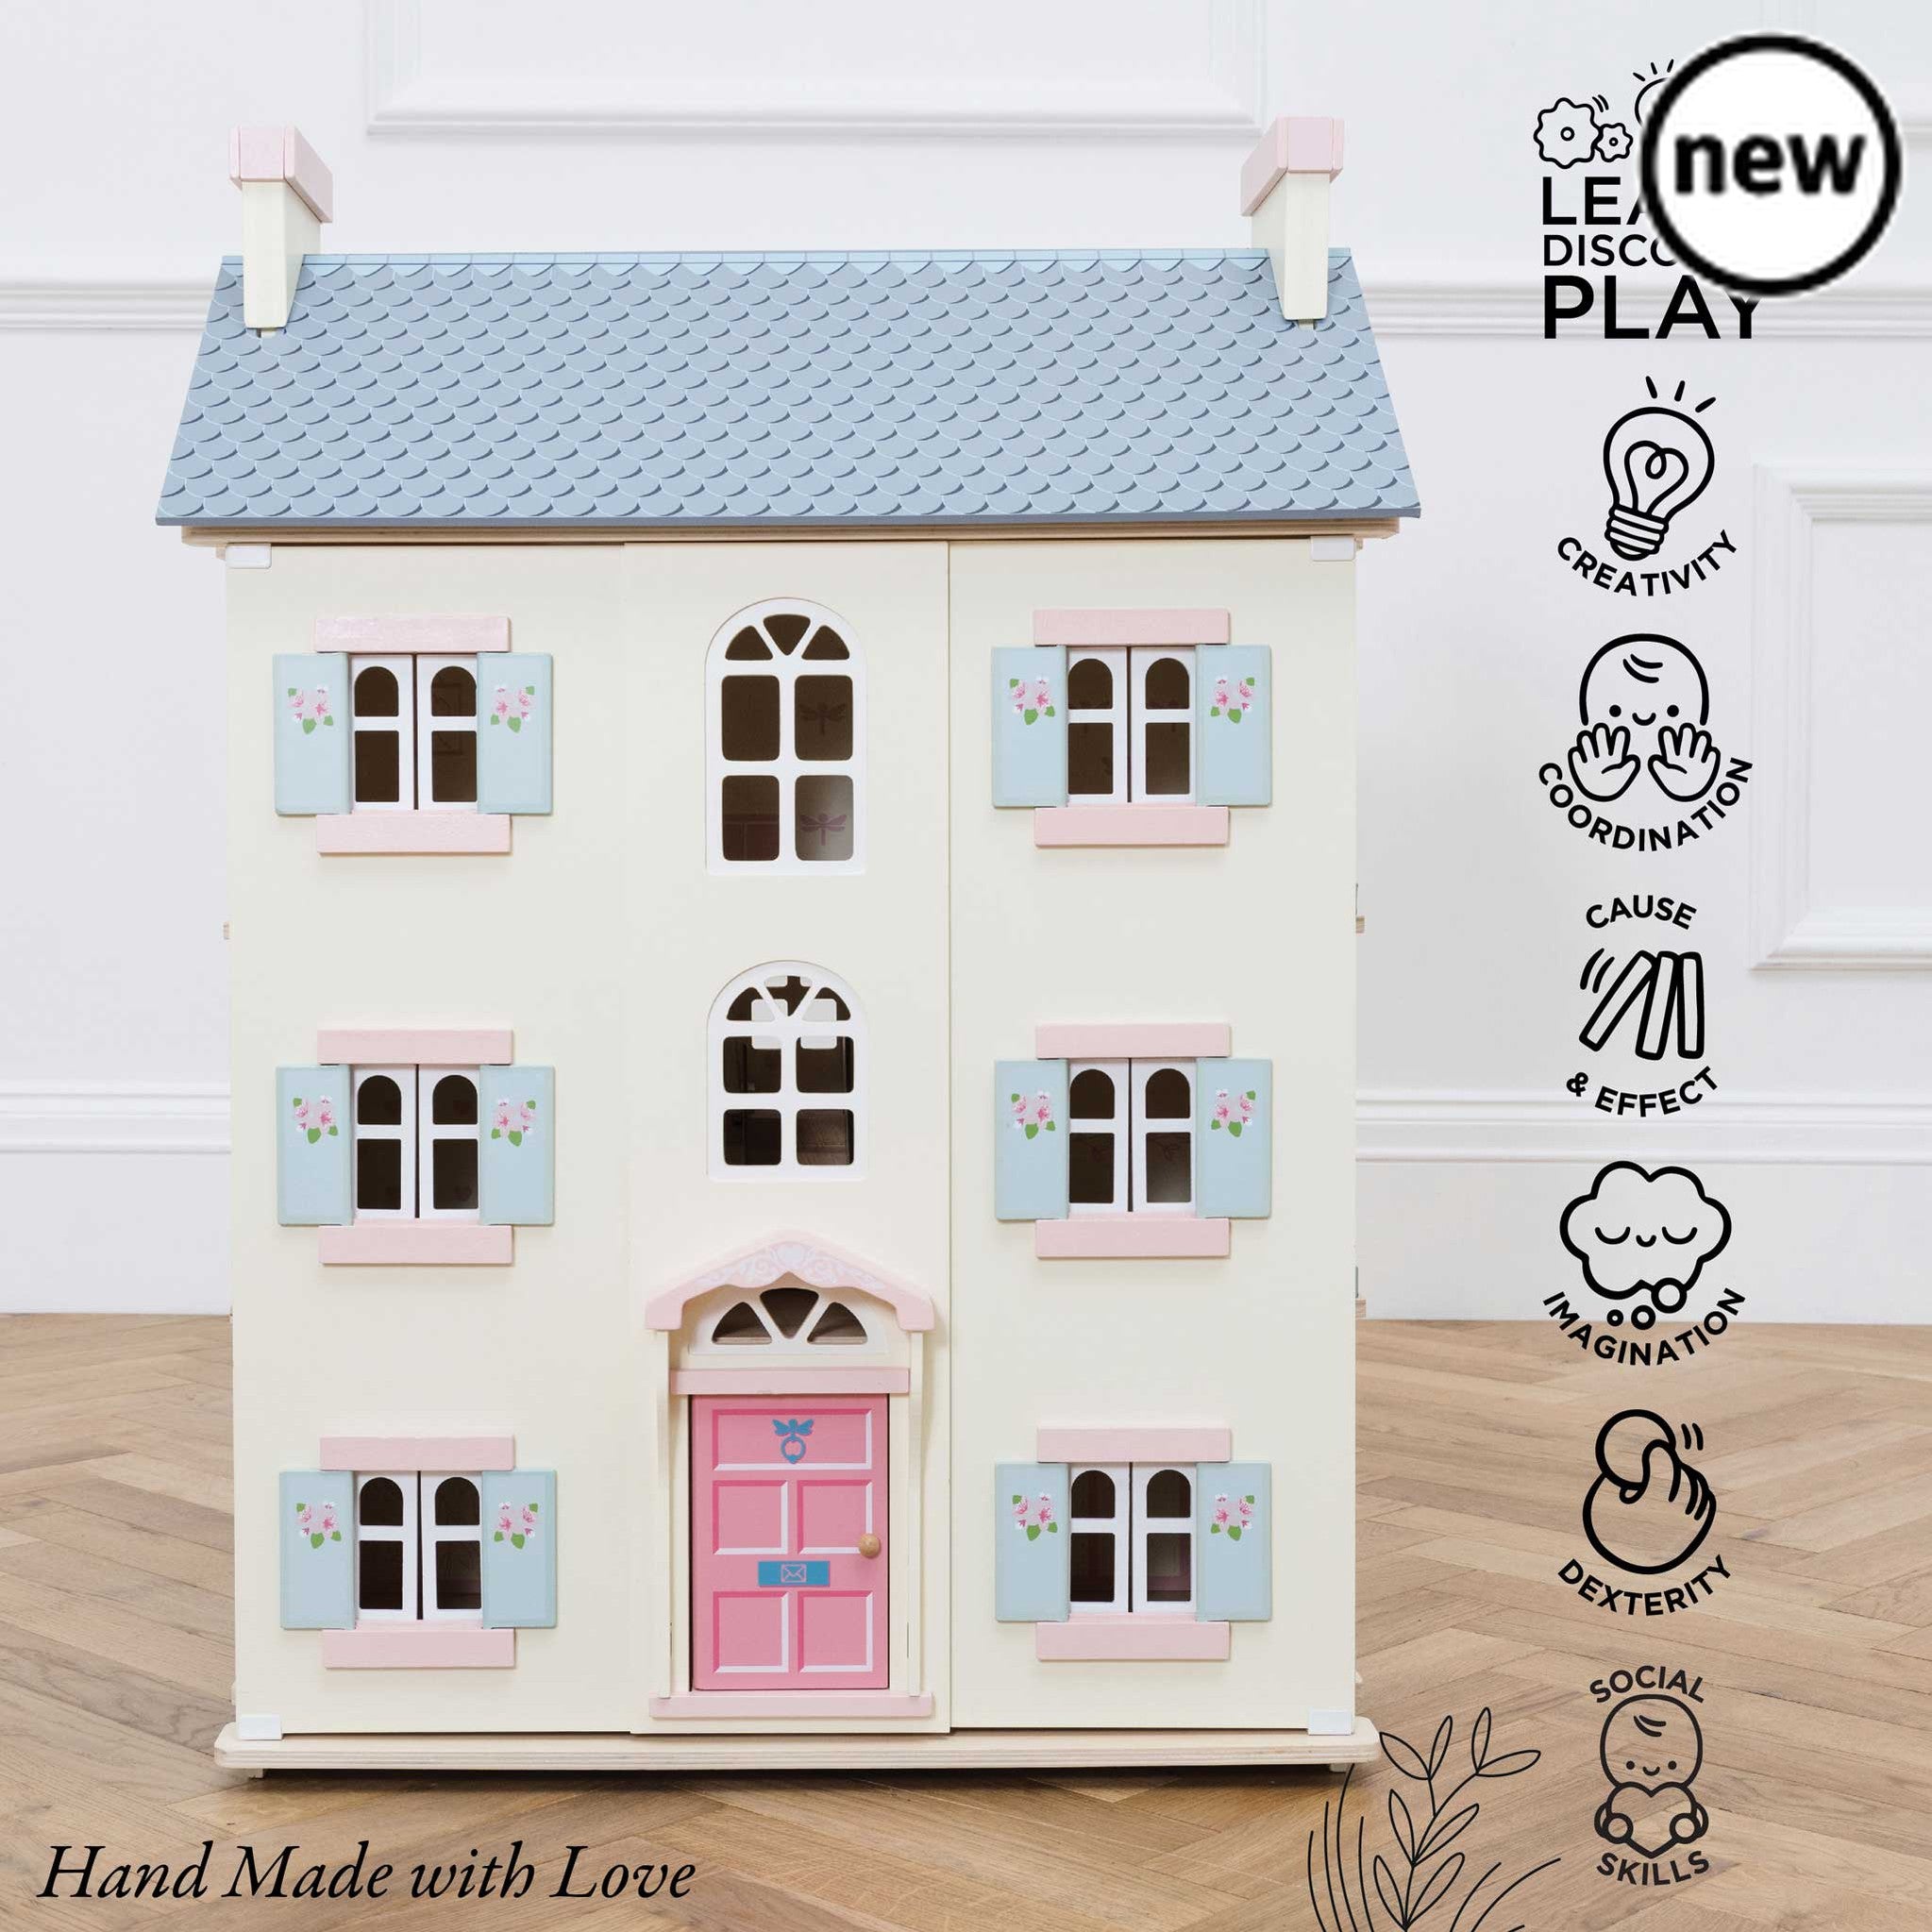 Cherry Tree Hall Doll House, Description Welcome home! This grand 4 storey wooden dolls house makes a stunning addition to your child’s toy collection. Role play fun adventures await with this simply stunning toy doll house, fitting for any miniature lord or lady. Full of exquisite details, this grandiose home is fully painted in soft creams with pink and blue accents and sweet flower motif detailing. A beautiful arched window feature sets off this truly magnificent house and the handsome front door is just